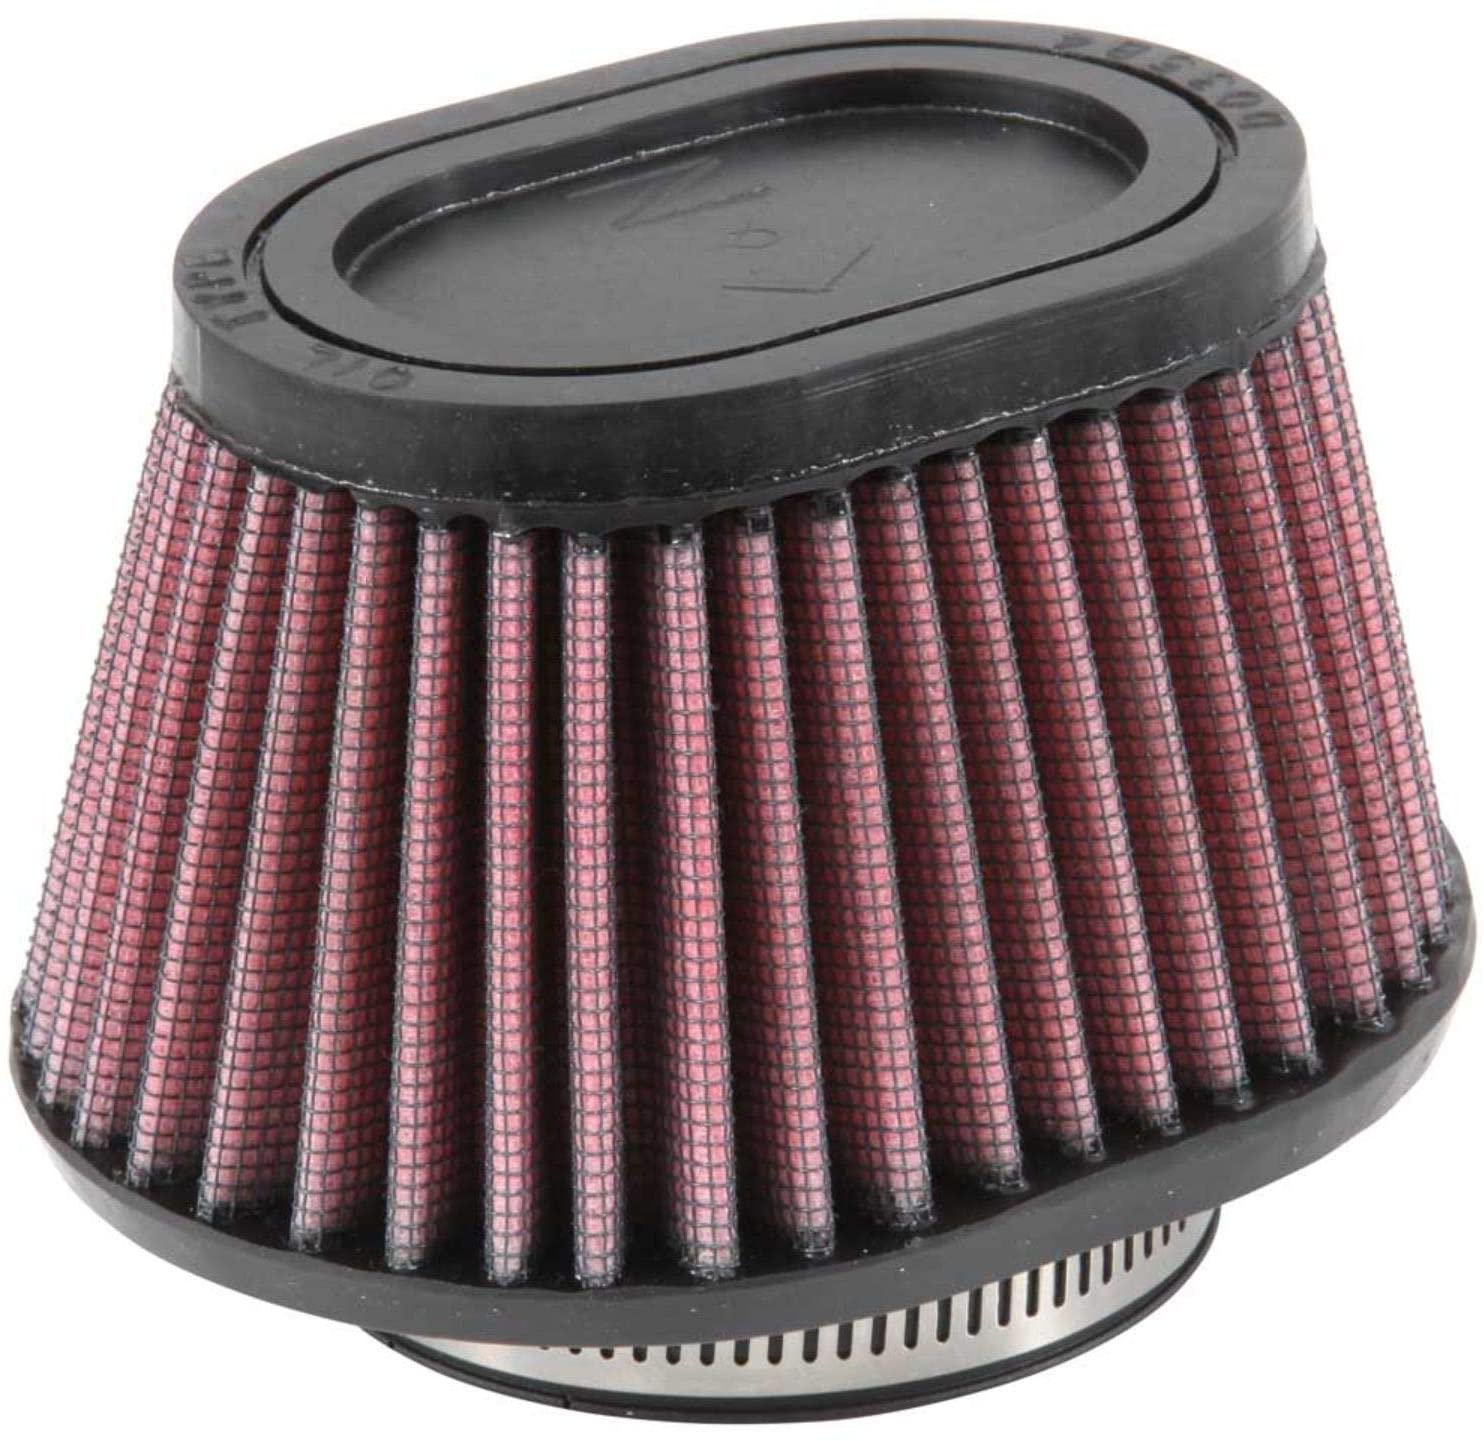 K&N Universal Clamp-On Air Filter: High Performance, Premium, Replacement Engine Filter: Flange Diameter: 2.4375 In, Filter Height: 2.75 In, Flange Length: 0.625 In, Shape: Oval Straight, RU-2780